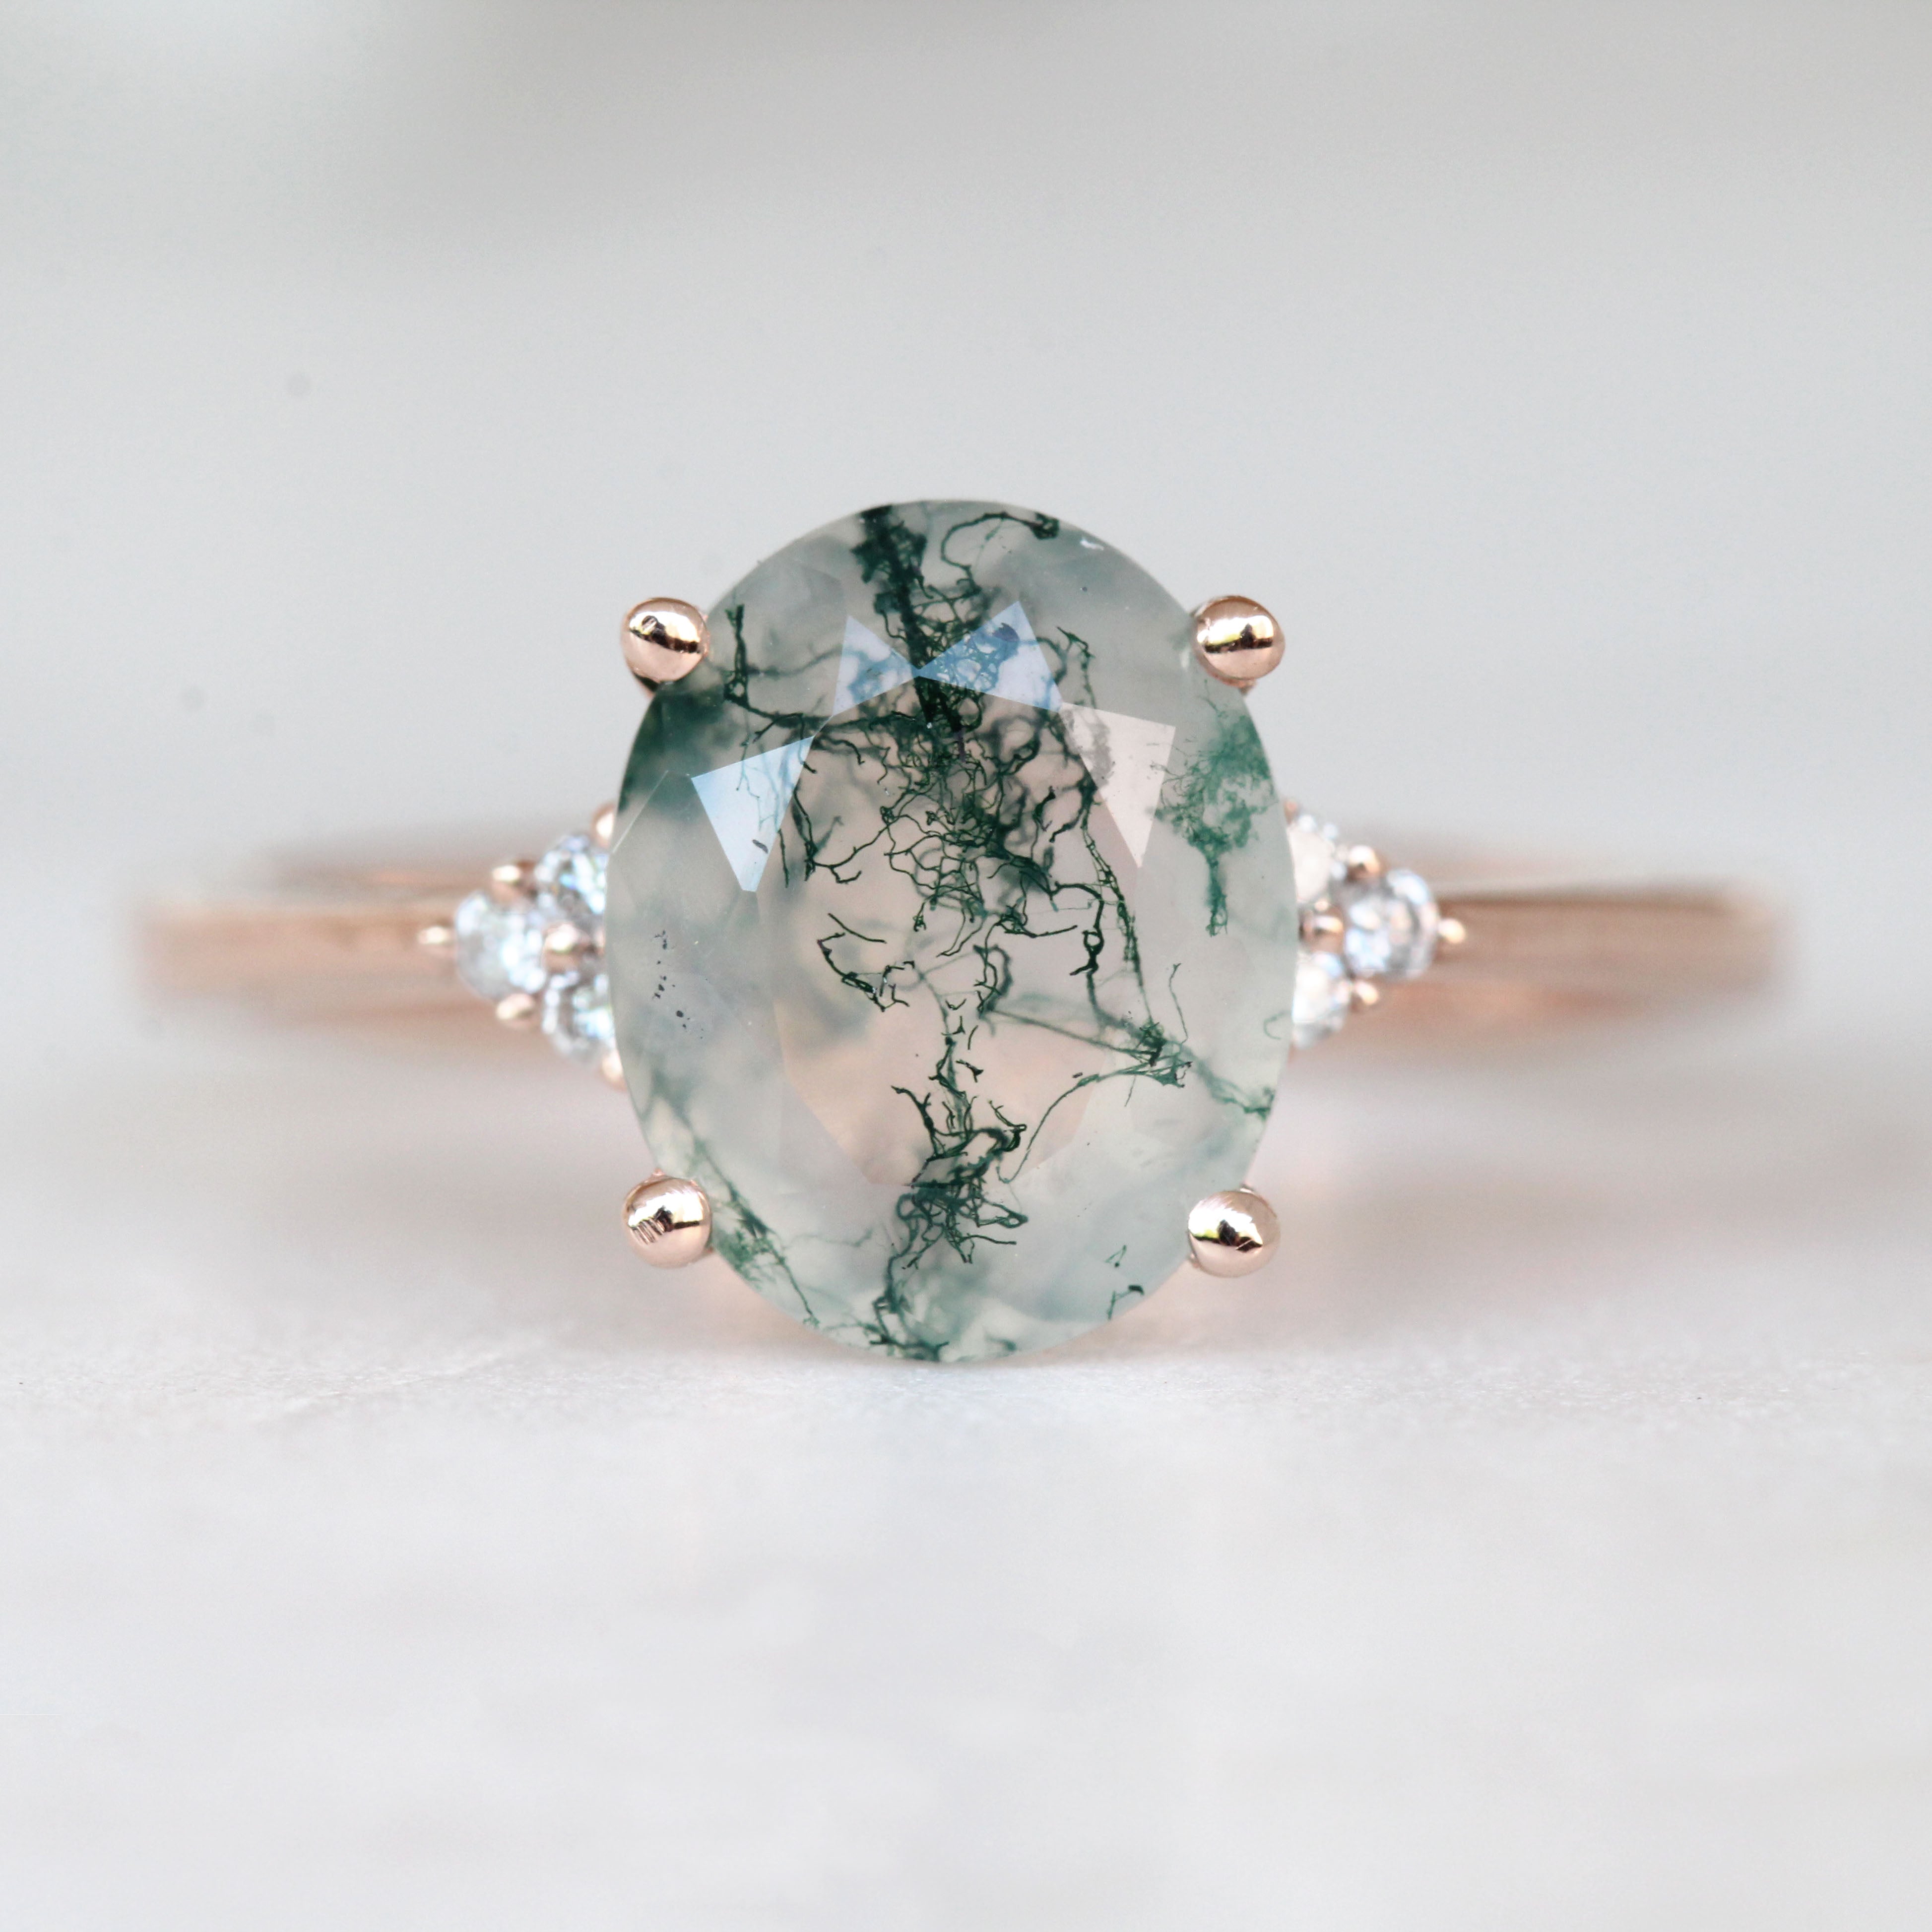 Imogene Ring with an Oval Moss Agate and White Accent Diamonds - Made to Order - Each Stone is Unique - Midwinter Co. Alternative Bridal Rings and Modern Fine Jewelry